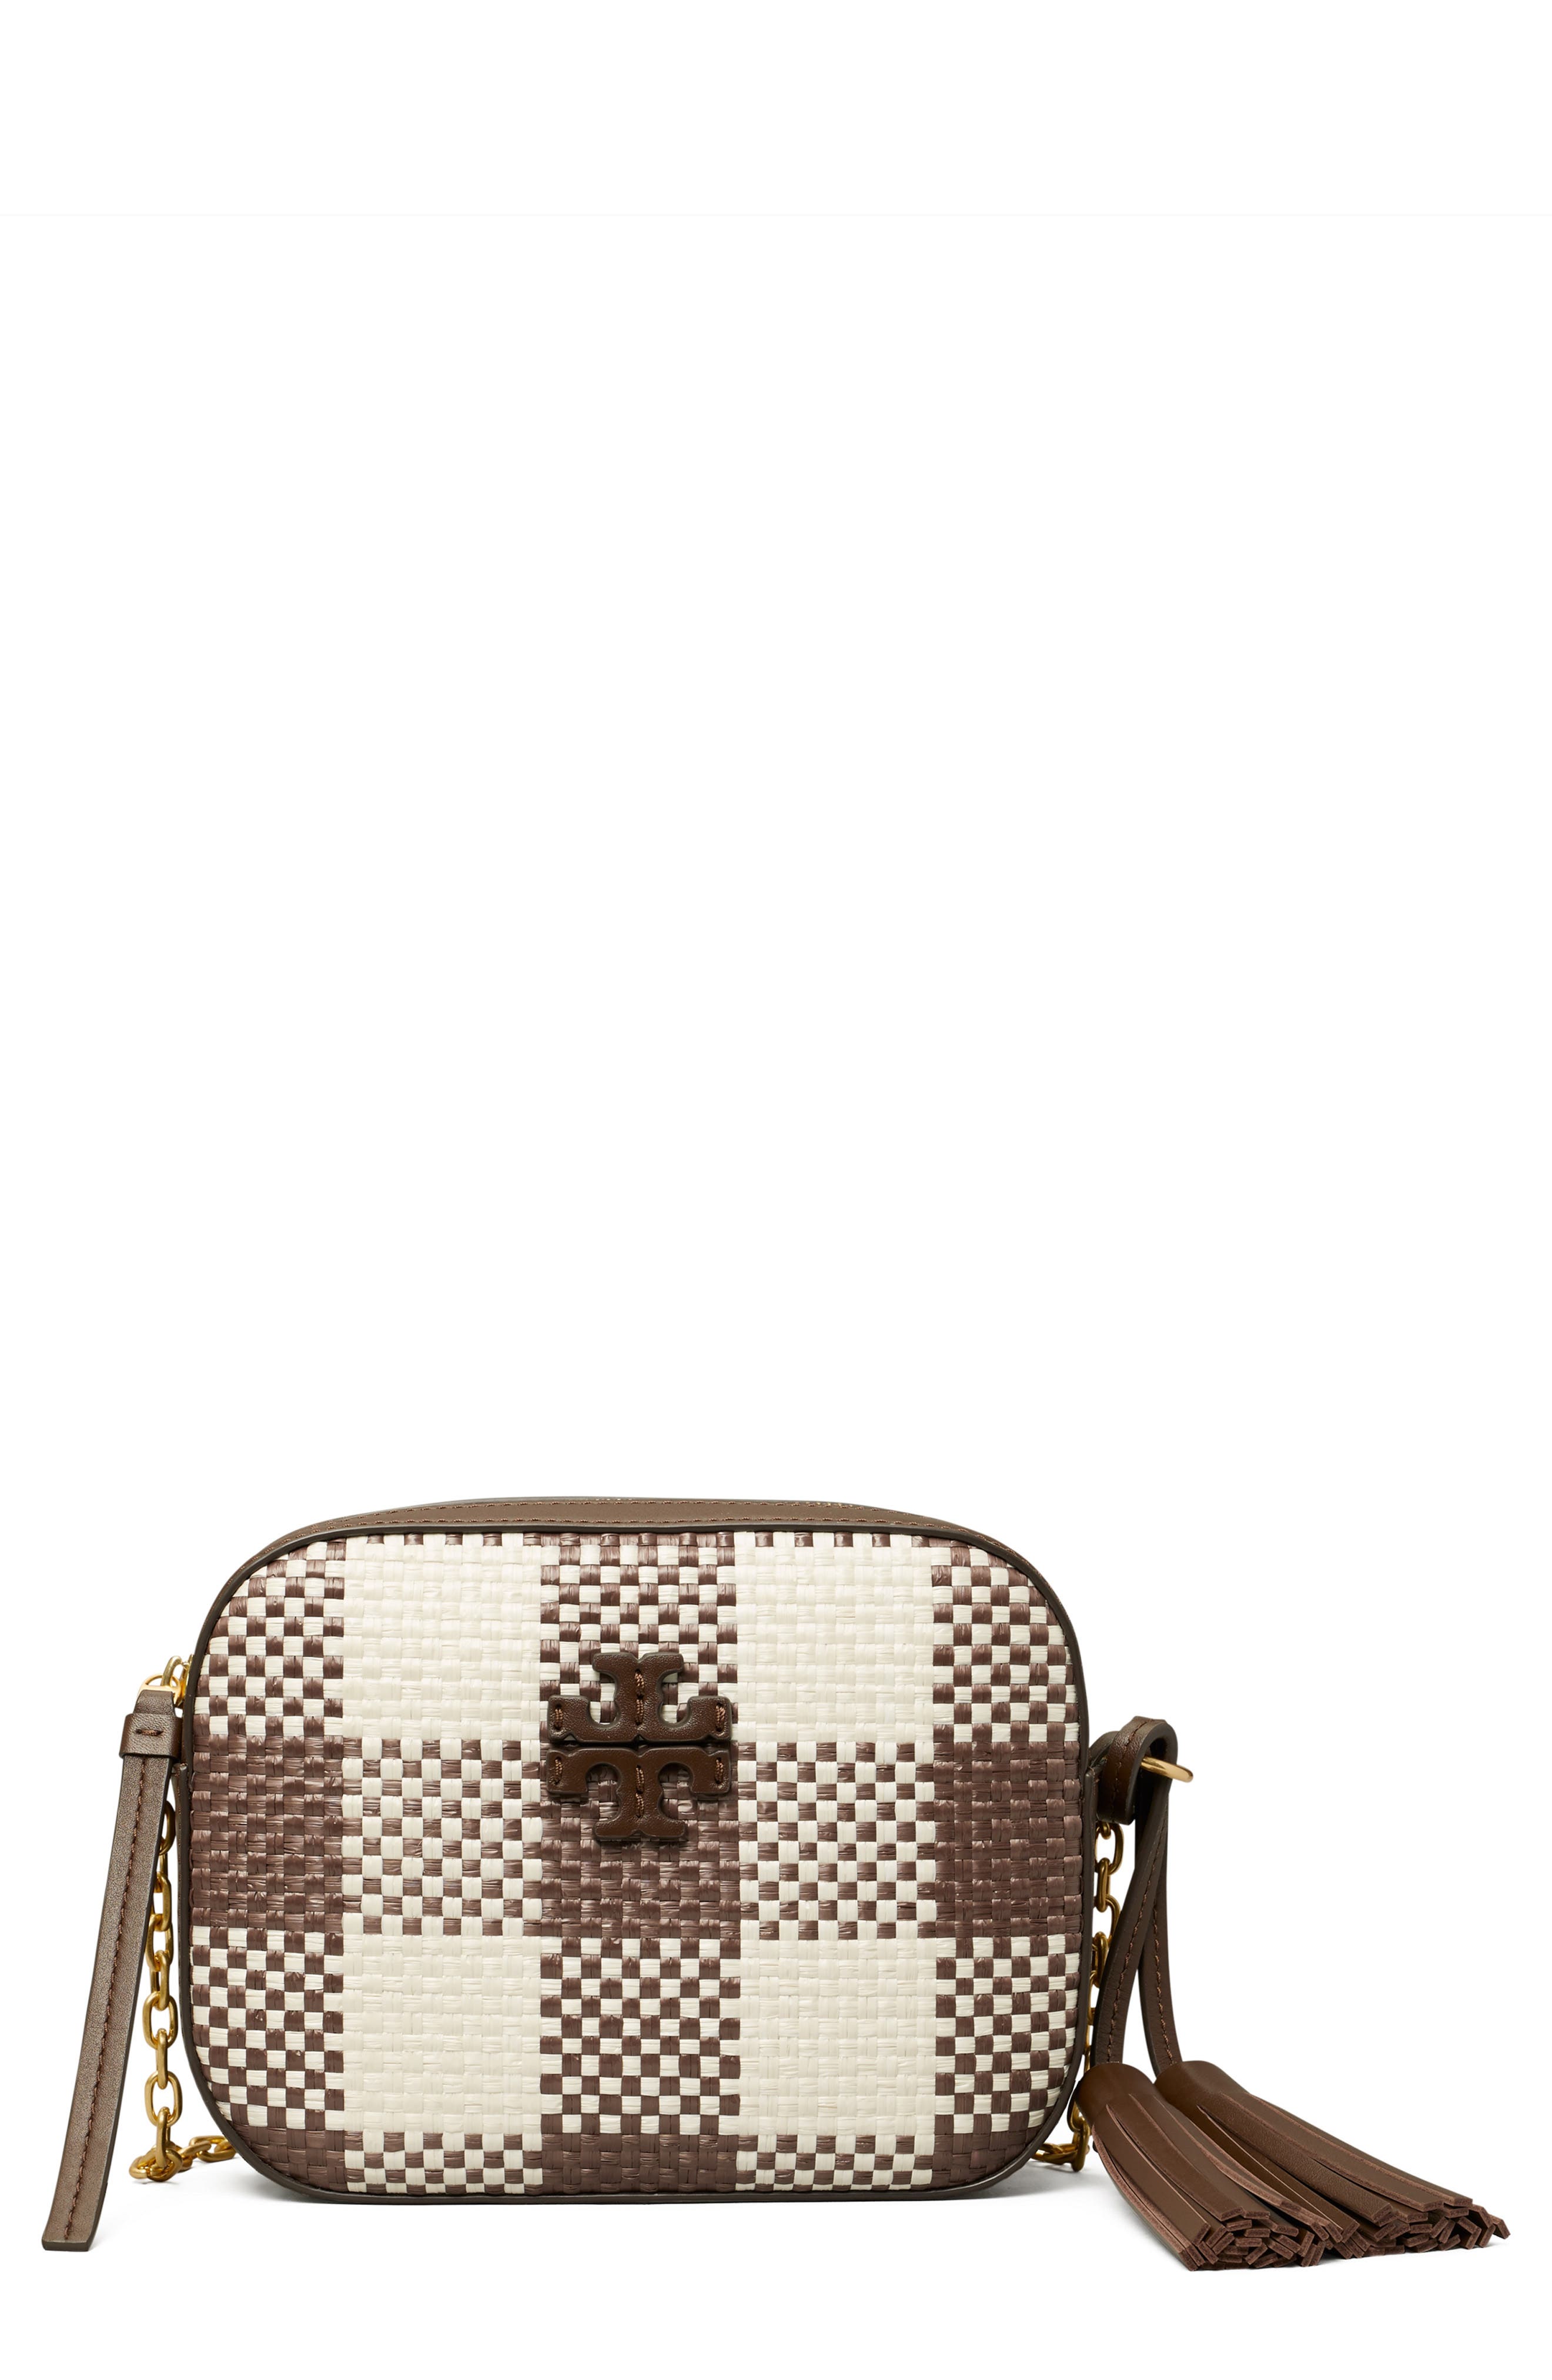 Tory Burch Bags At Nordstrom Rack Store, SAVE 60% 